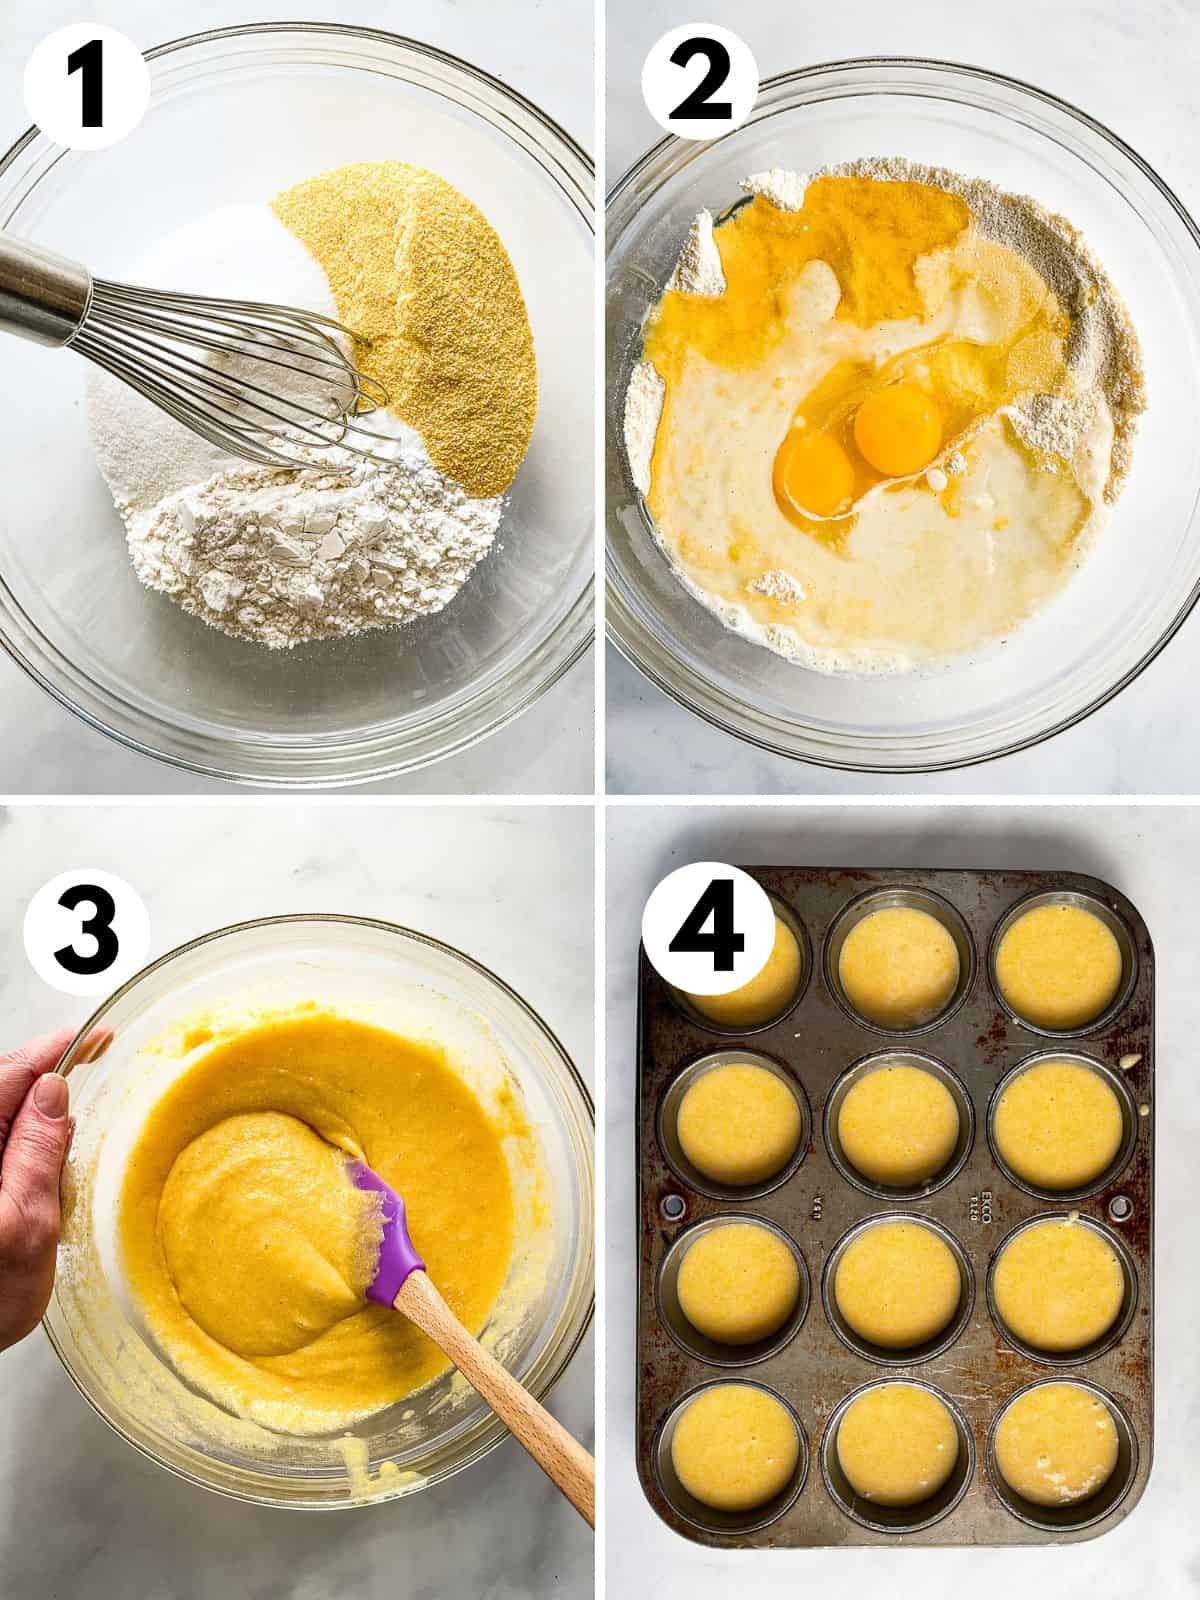 Steps for making gluten-free corn muffins. 1. Whisking the dry ingredients. 2. Adding the milk, eggs, and oil. 3. Stirring the batter. 4. The corn muffin batter in a greased muffin pan.